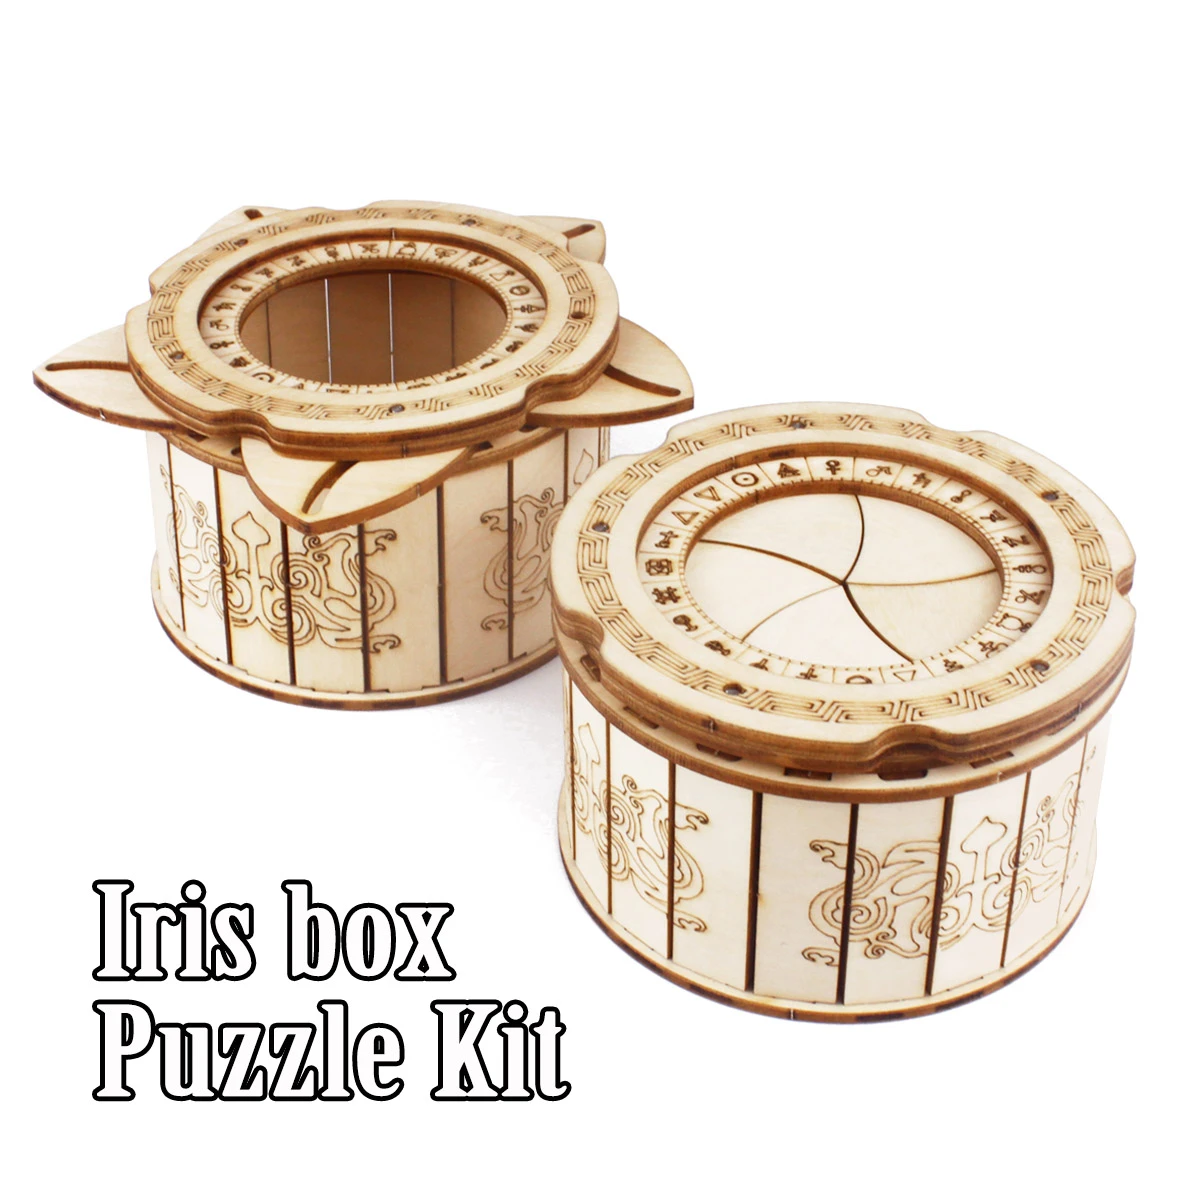 Iris Box Mechanical Gear Treasure 3D Wooden Puzzle Craft Toy Brain Teaser DIY Model Building Kits Gift for Adults Teens